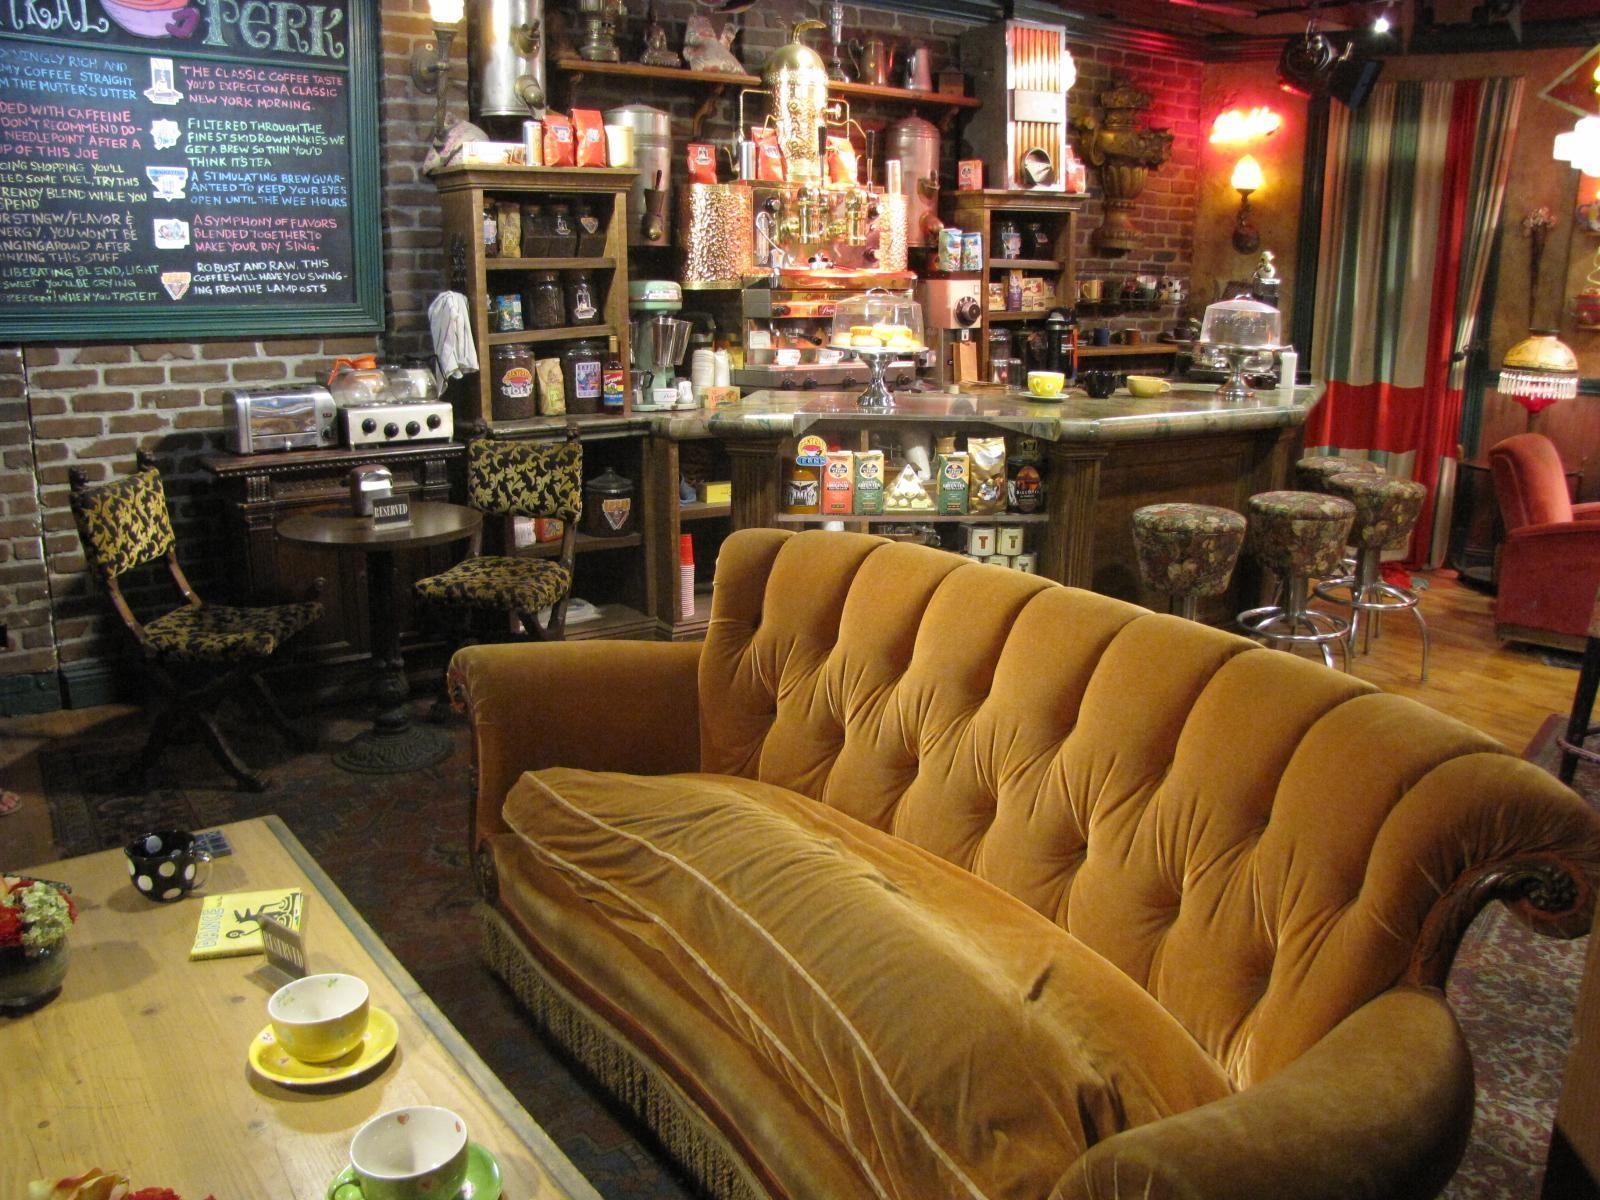 Central Perk. Now this is a coffee house I'd love to visit. Wish